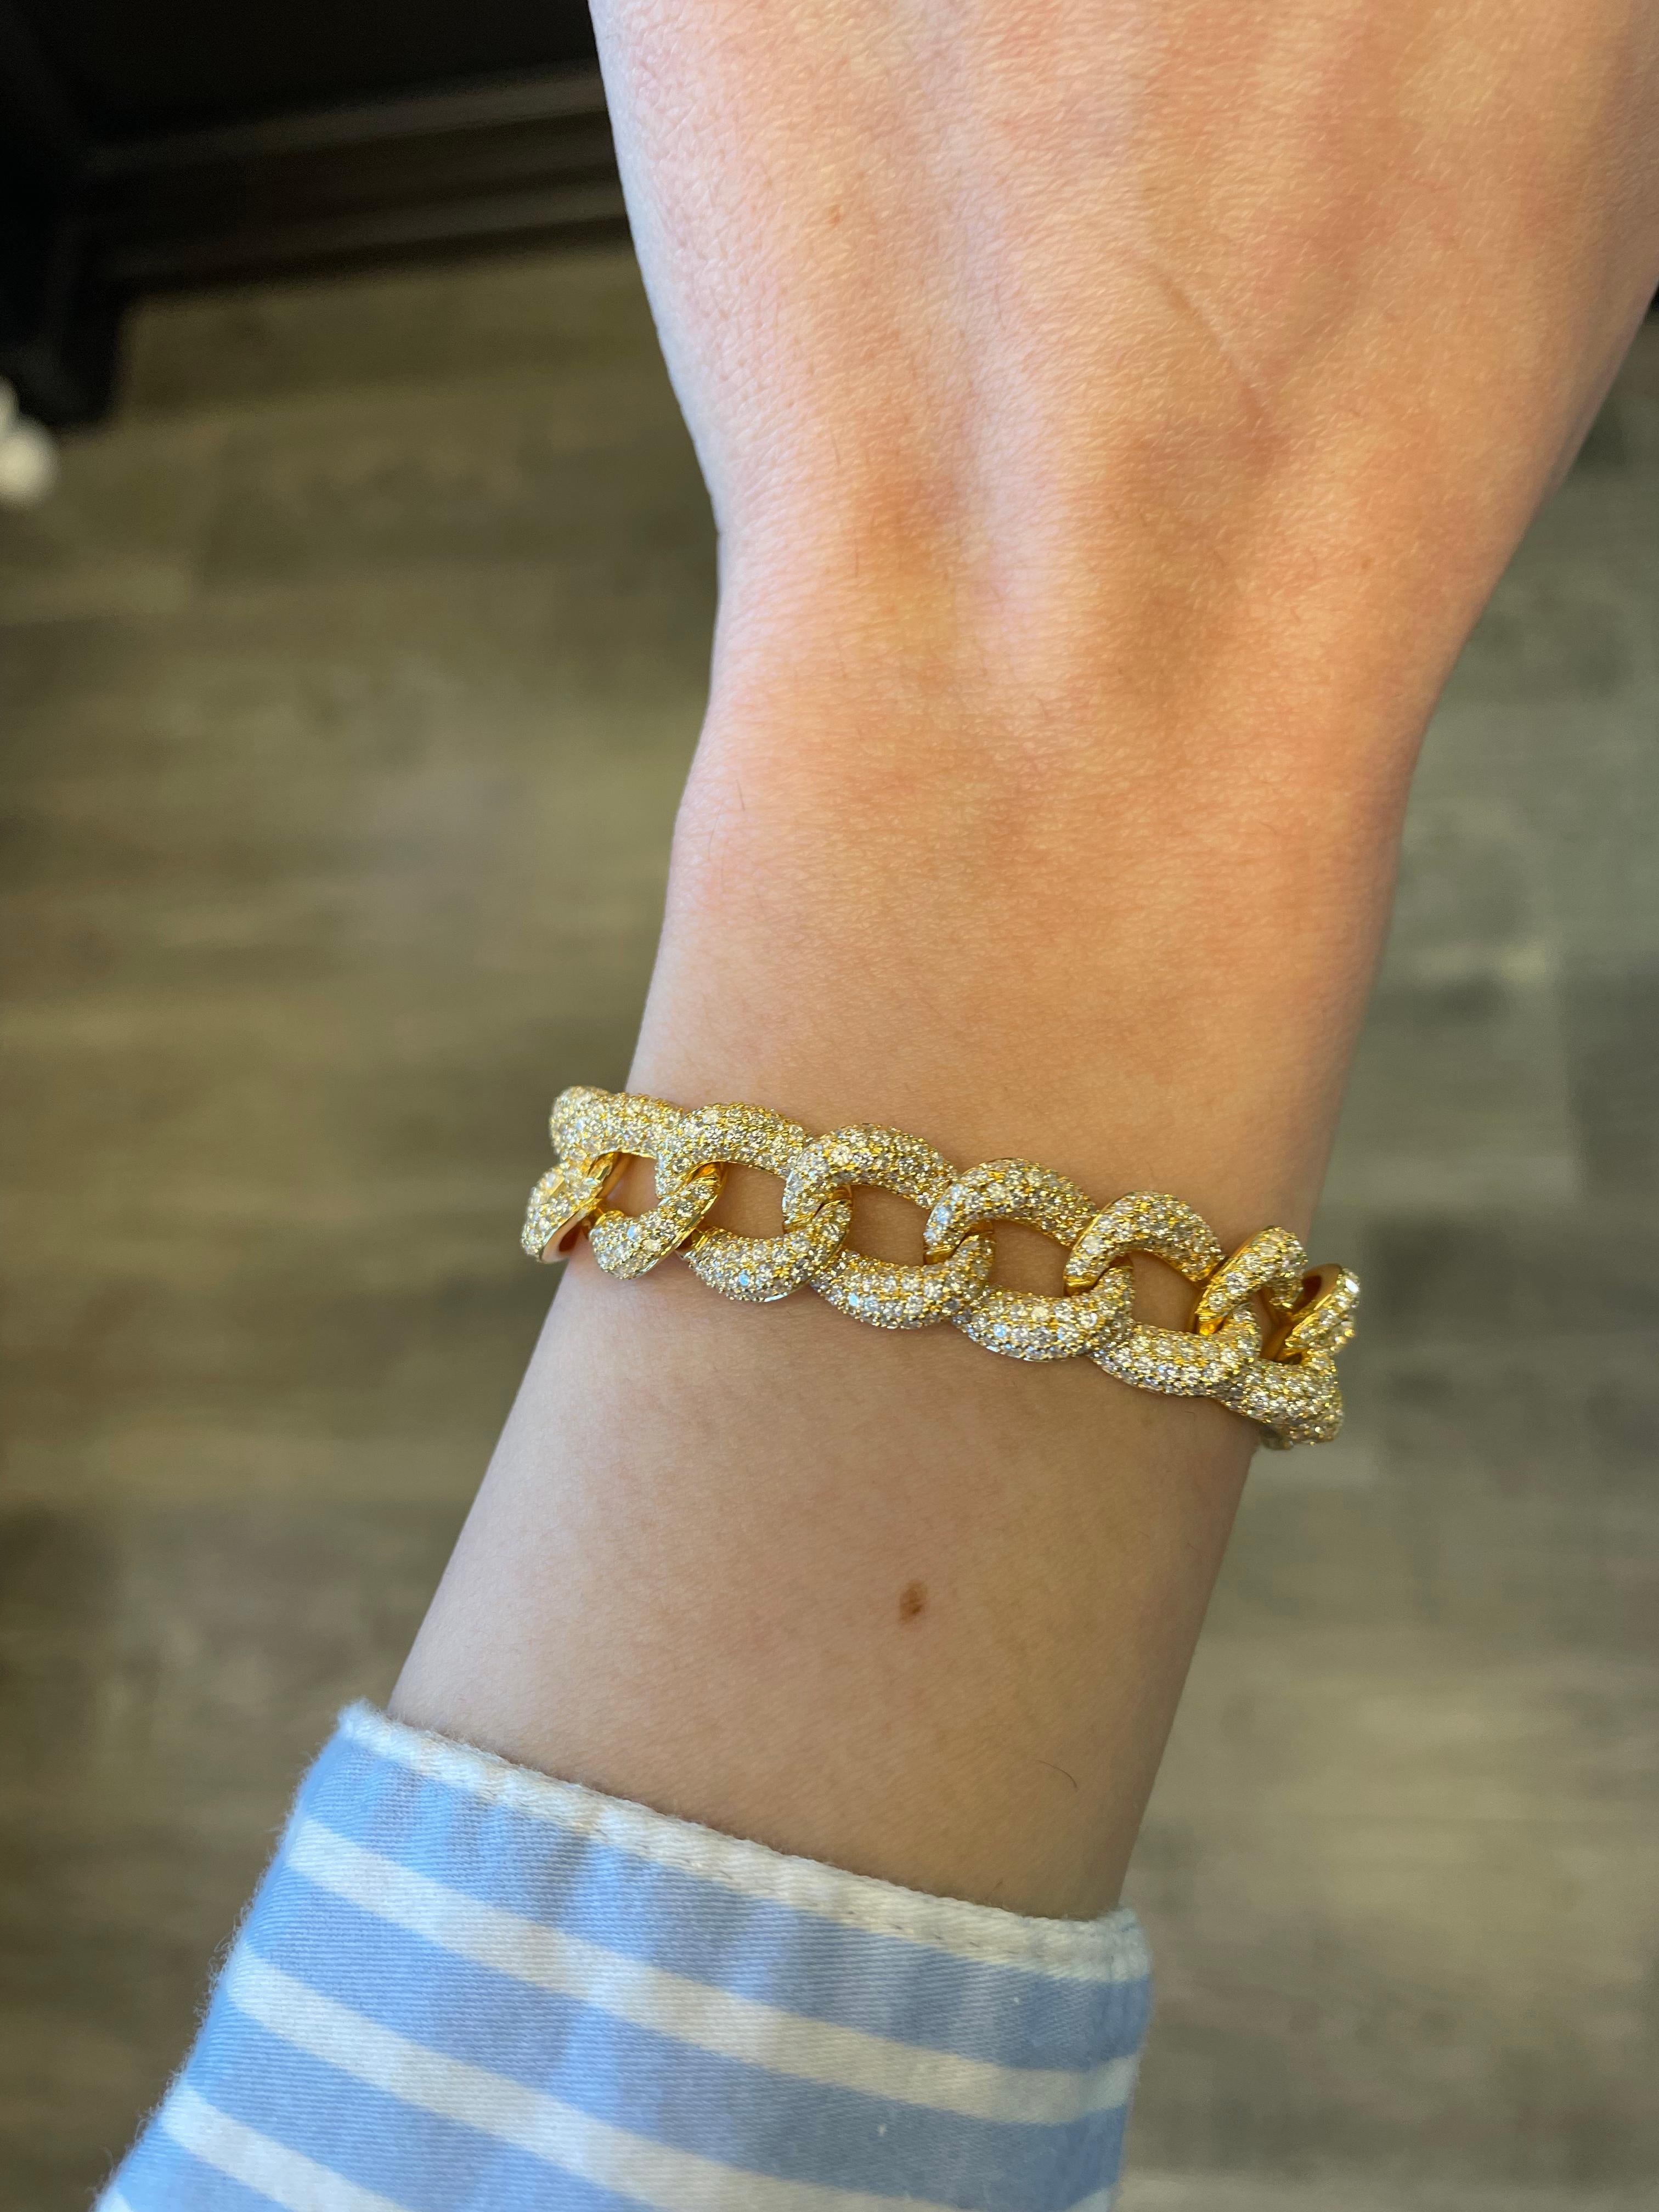 Modern diamond cuban link bracelet. High jewelry by Alexander Beverly Hills.
1290 round brilliant diamonds, 9.11 carats total. Approximately G/H color and VS2/SI1 clarity. 18k yellow gold, 45.55 grams, and 12mm width.
Accommodated with an up-to-date